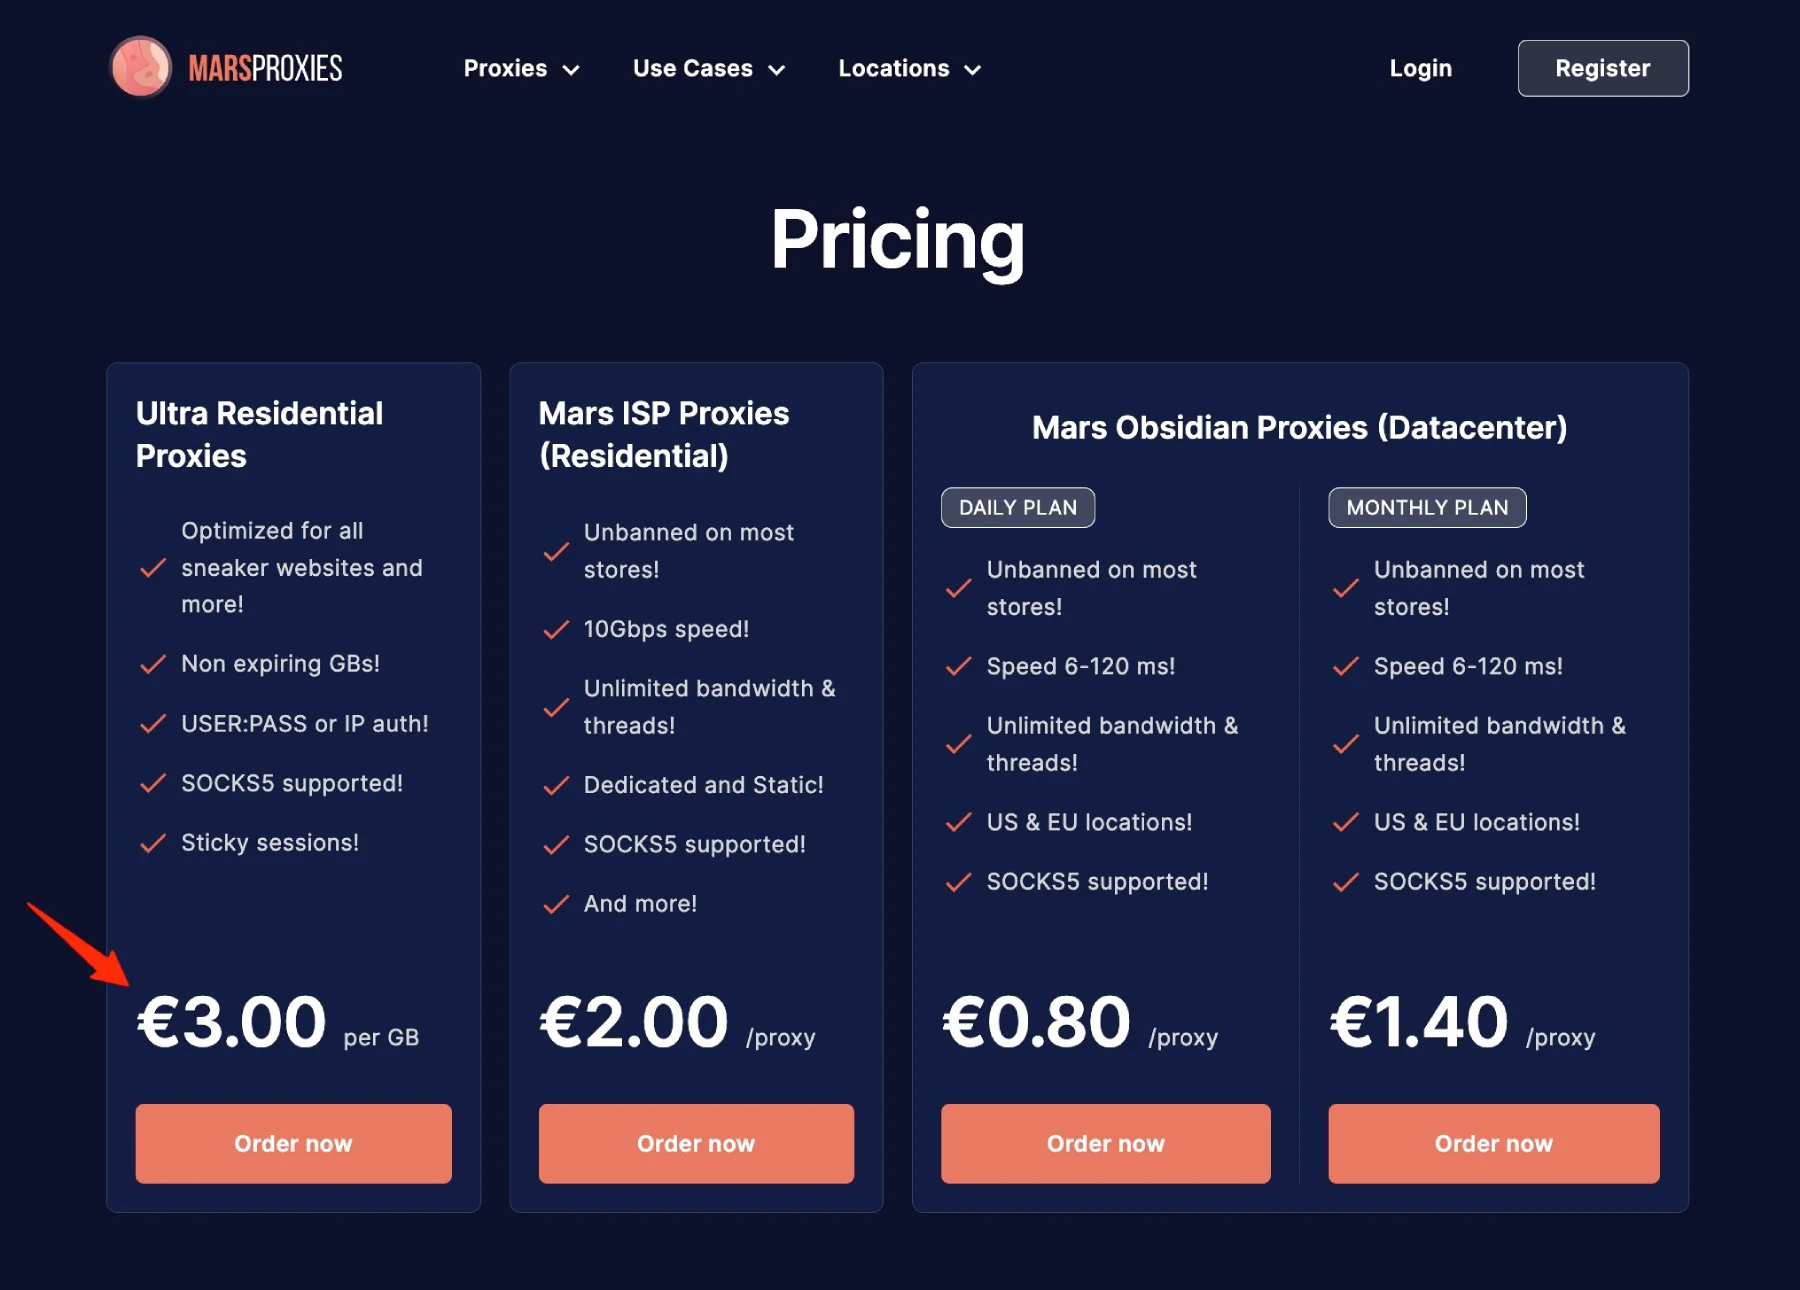 MarsProxies pricing plans for proxies